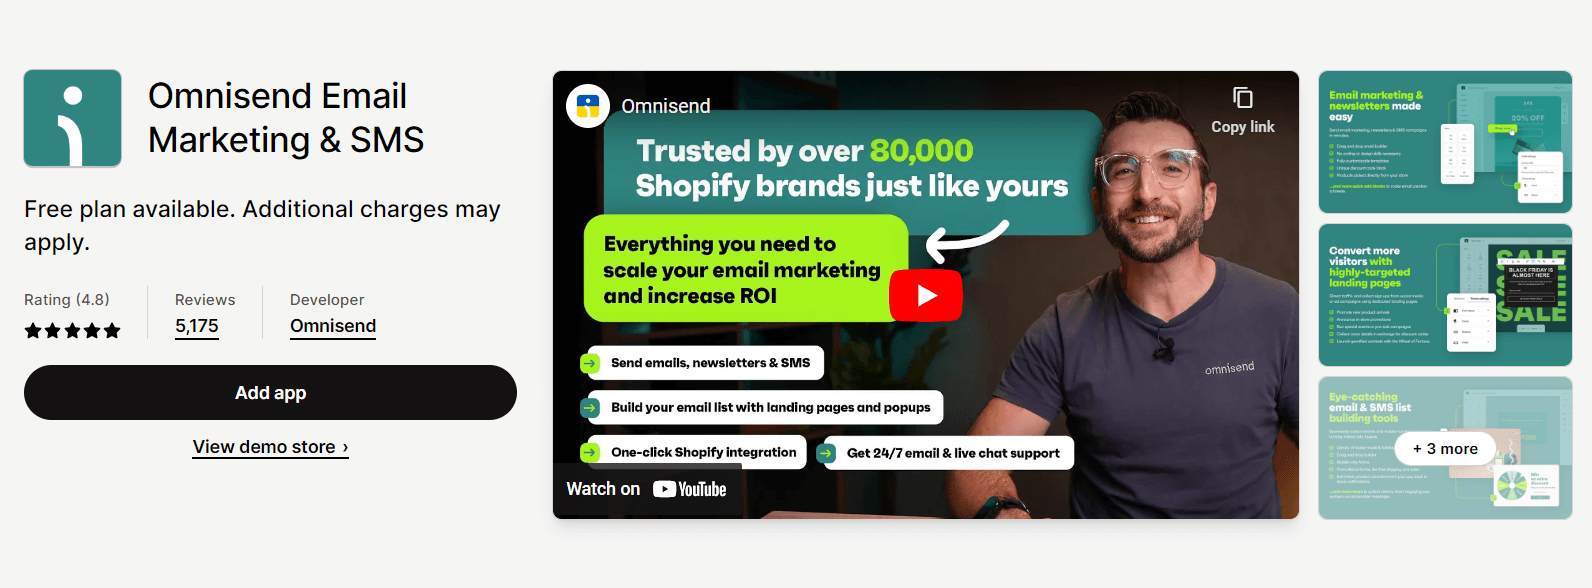 Best marketing apps for Shopify - Omnisend